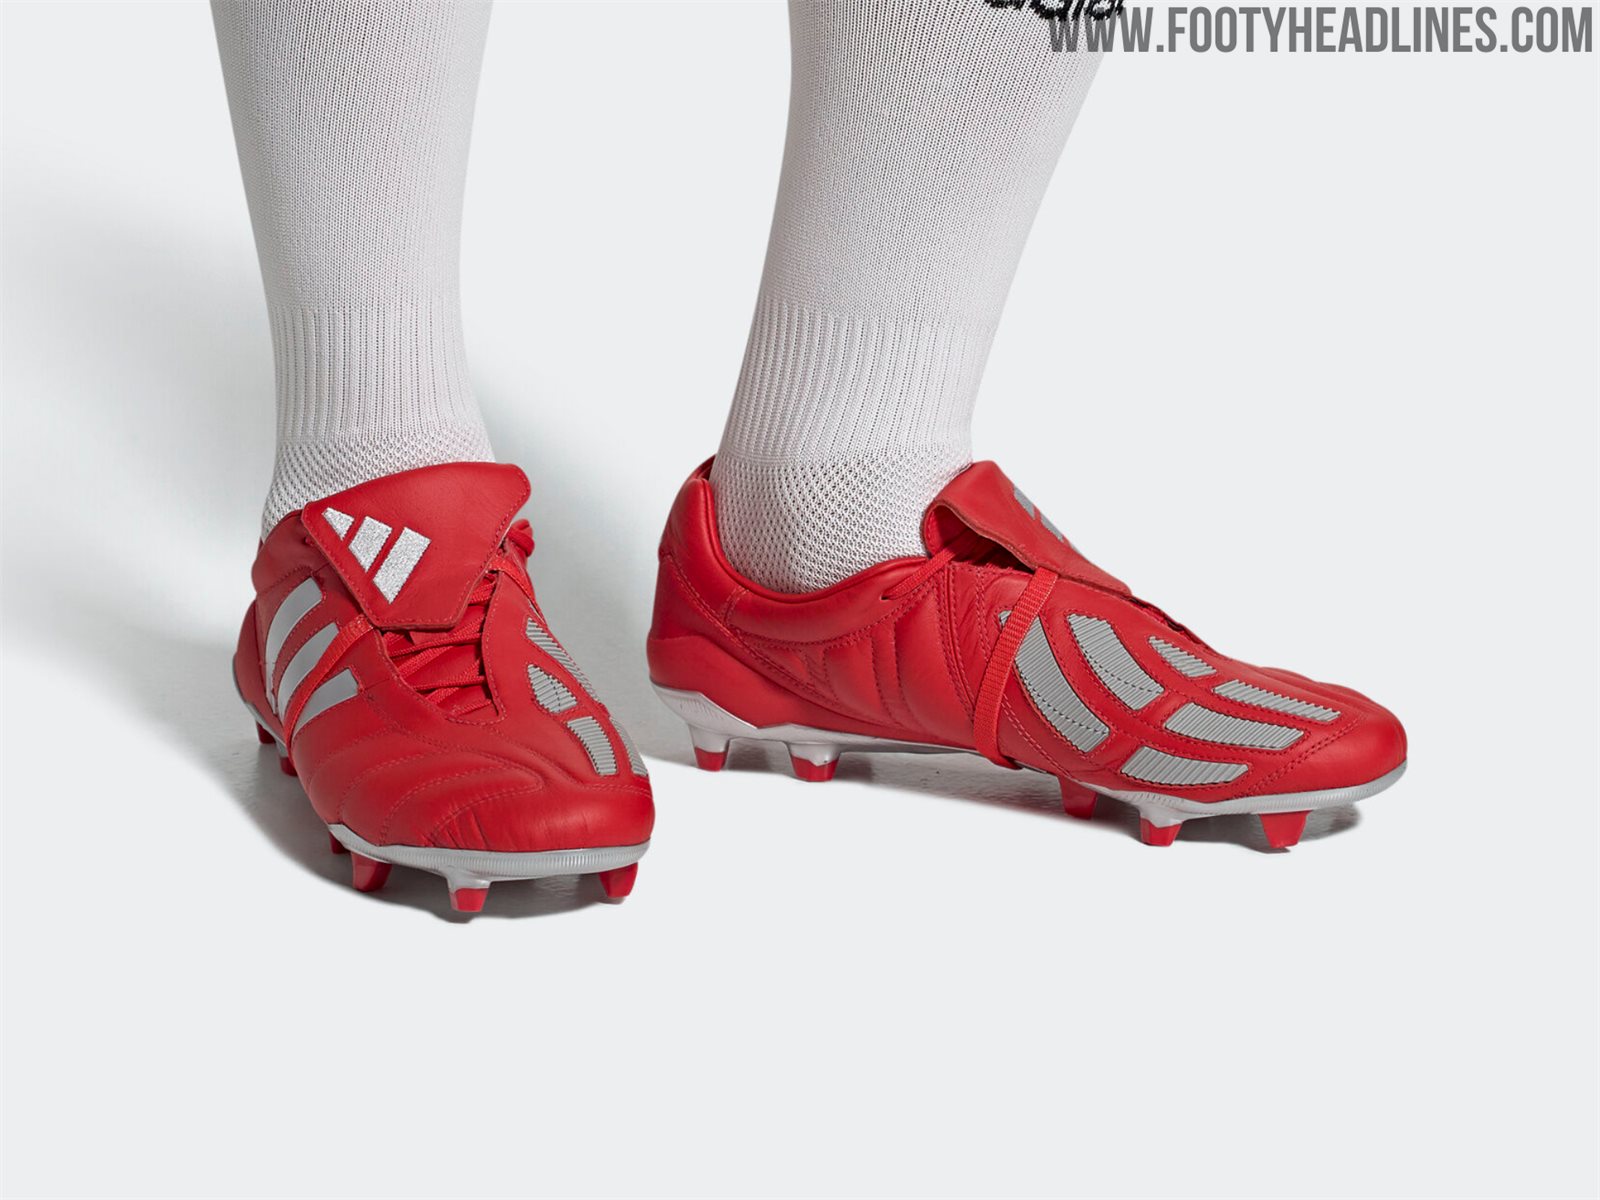 Adidas Global Adidas Predator Mania Firm Ground Boots Red White None ...